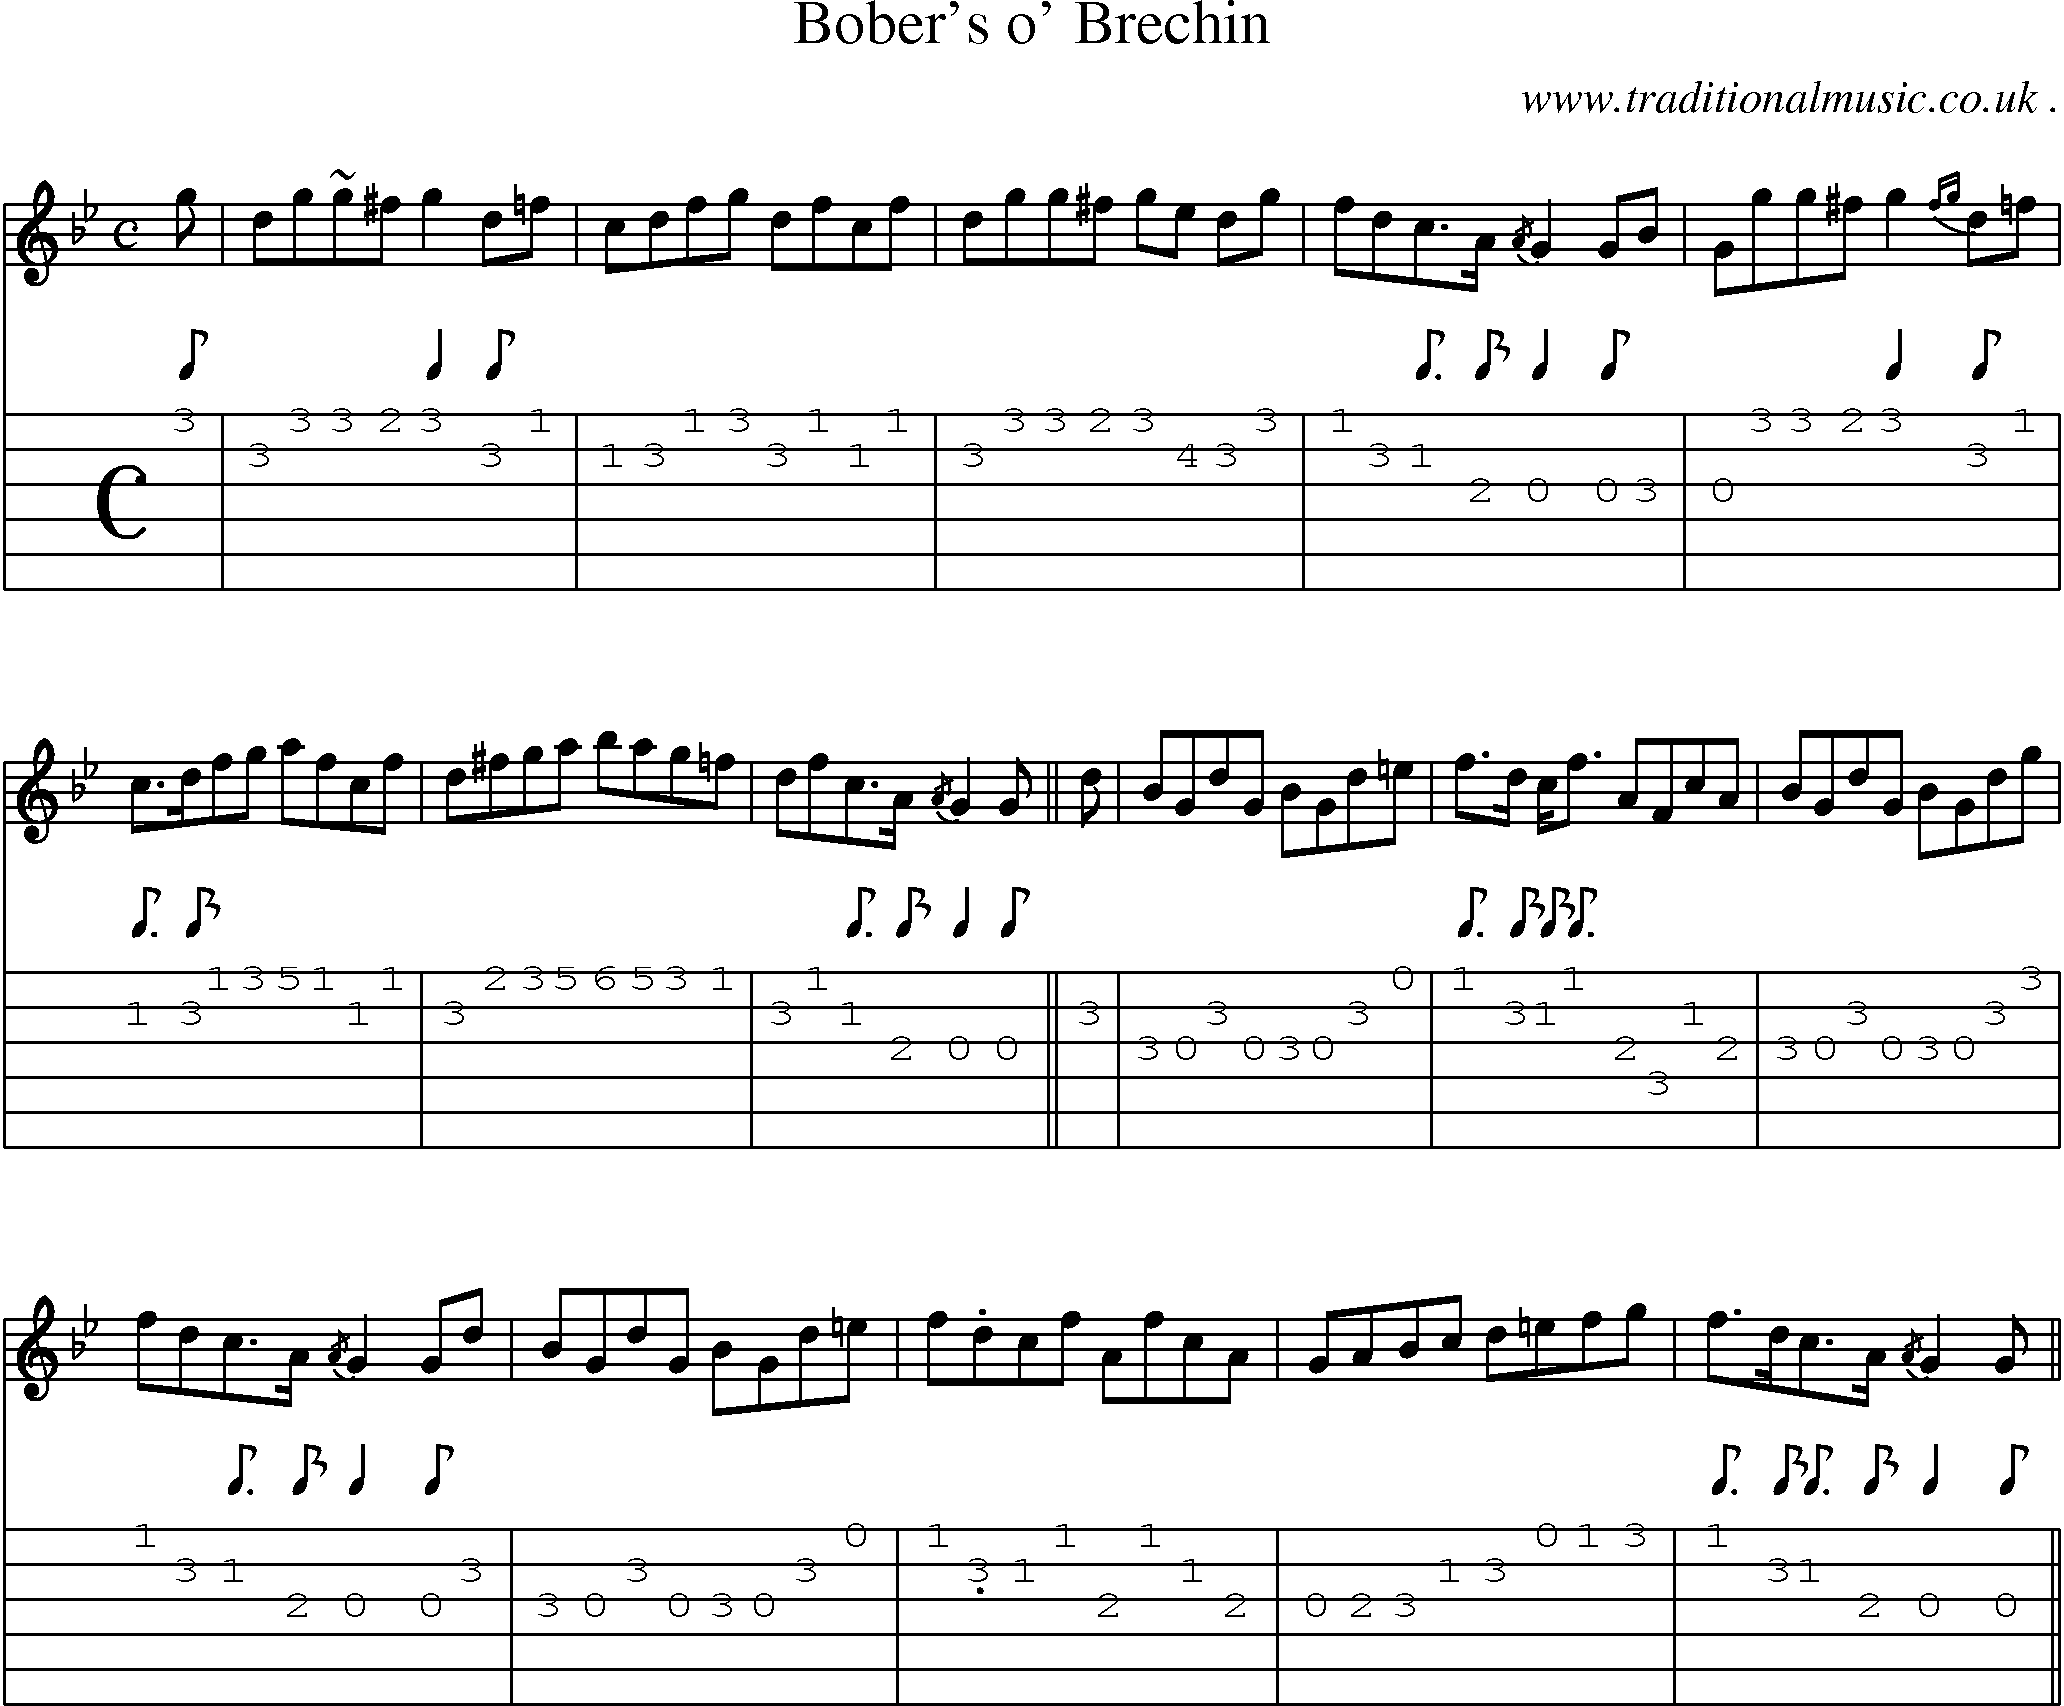 Sheet-music  score, Chords and Guitar Tabs for Bobers O Brechin